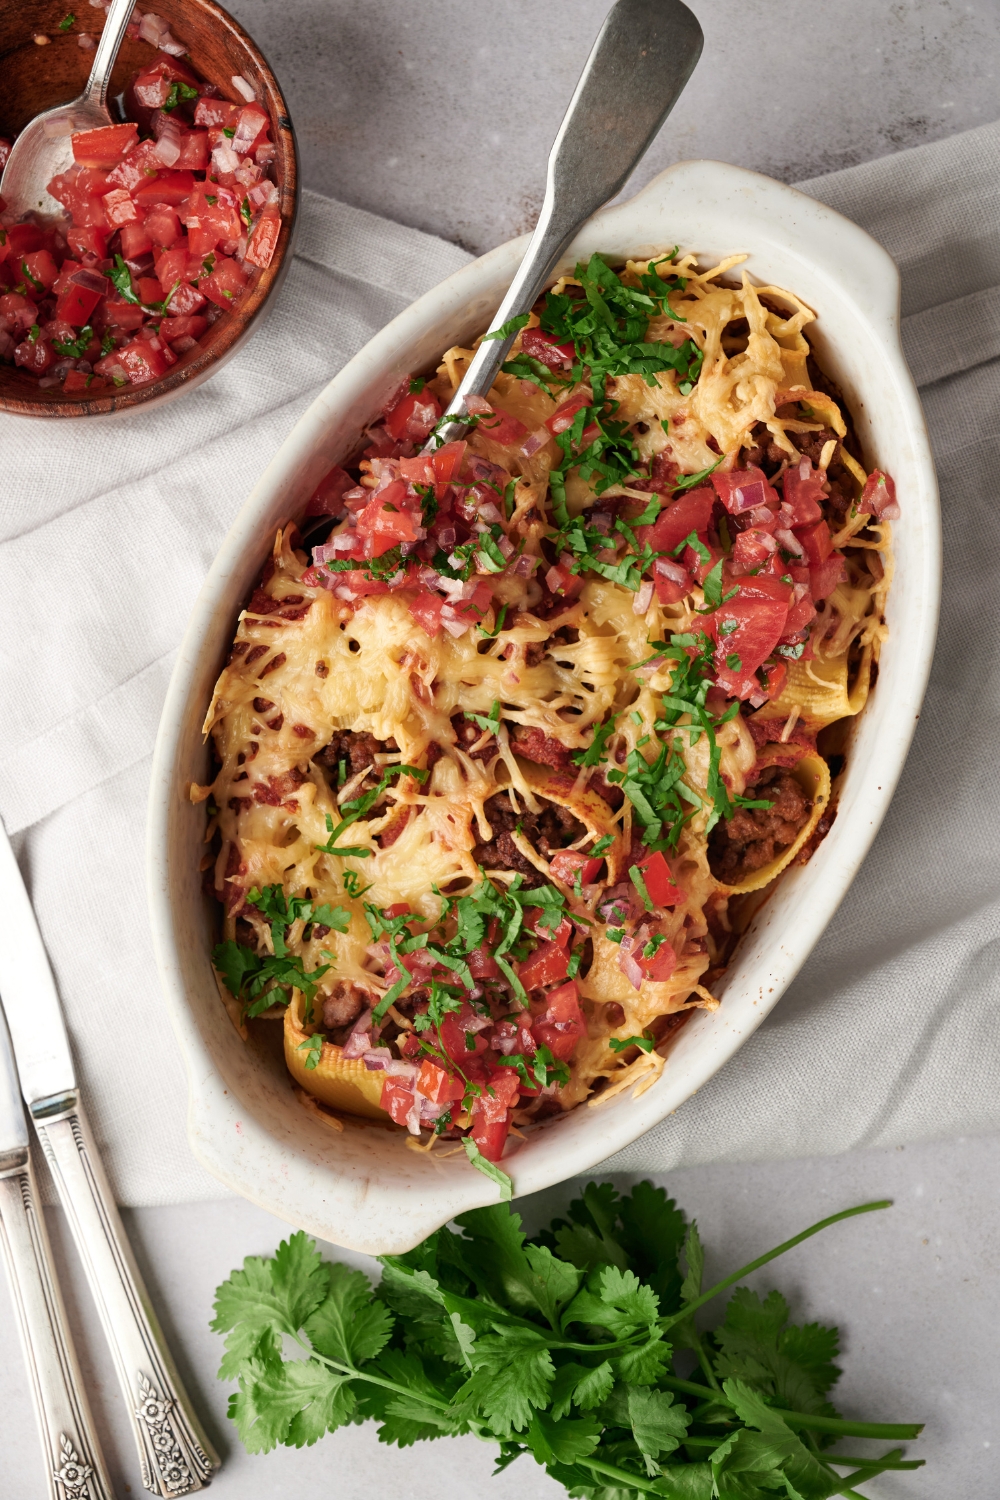 A baking dish filled with baked pasta shells covered in melted cheese, pico de gallo, and fresh green herbs.